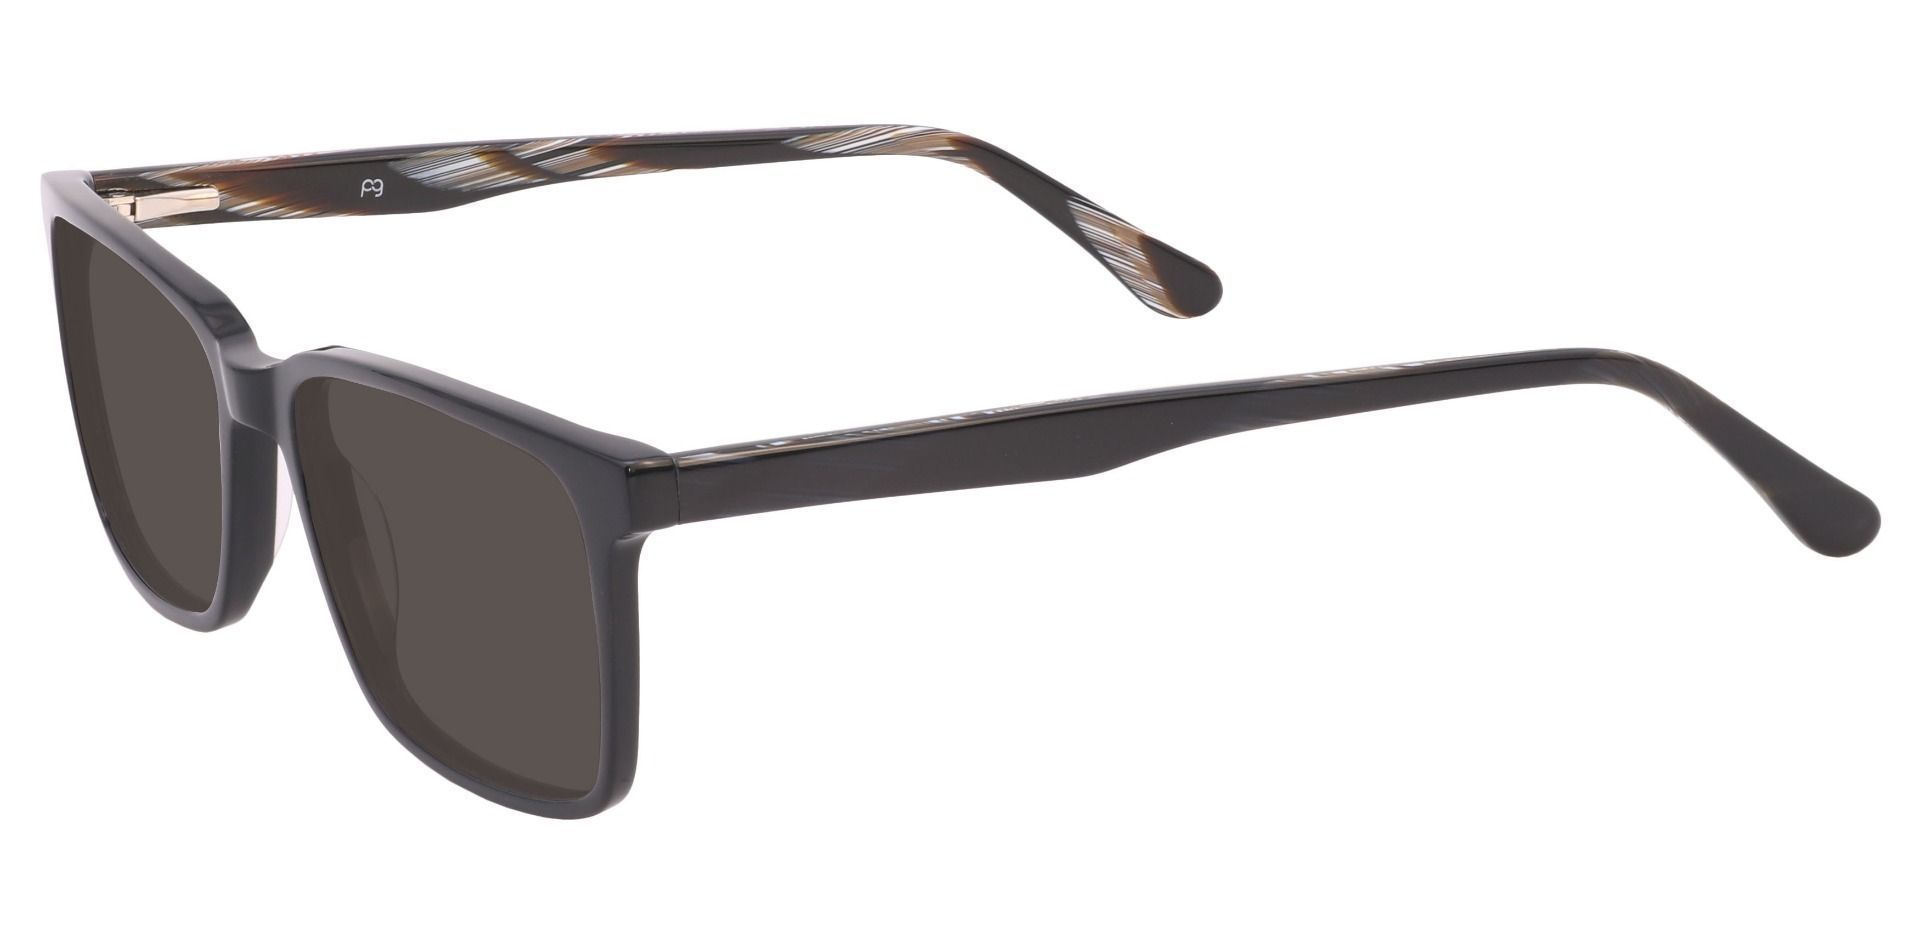 Venice Rectangle Lined Bifocal Sunglasses - Black Frame With Gray Lenses